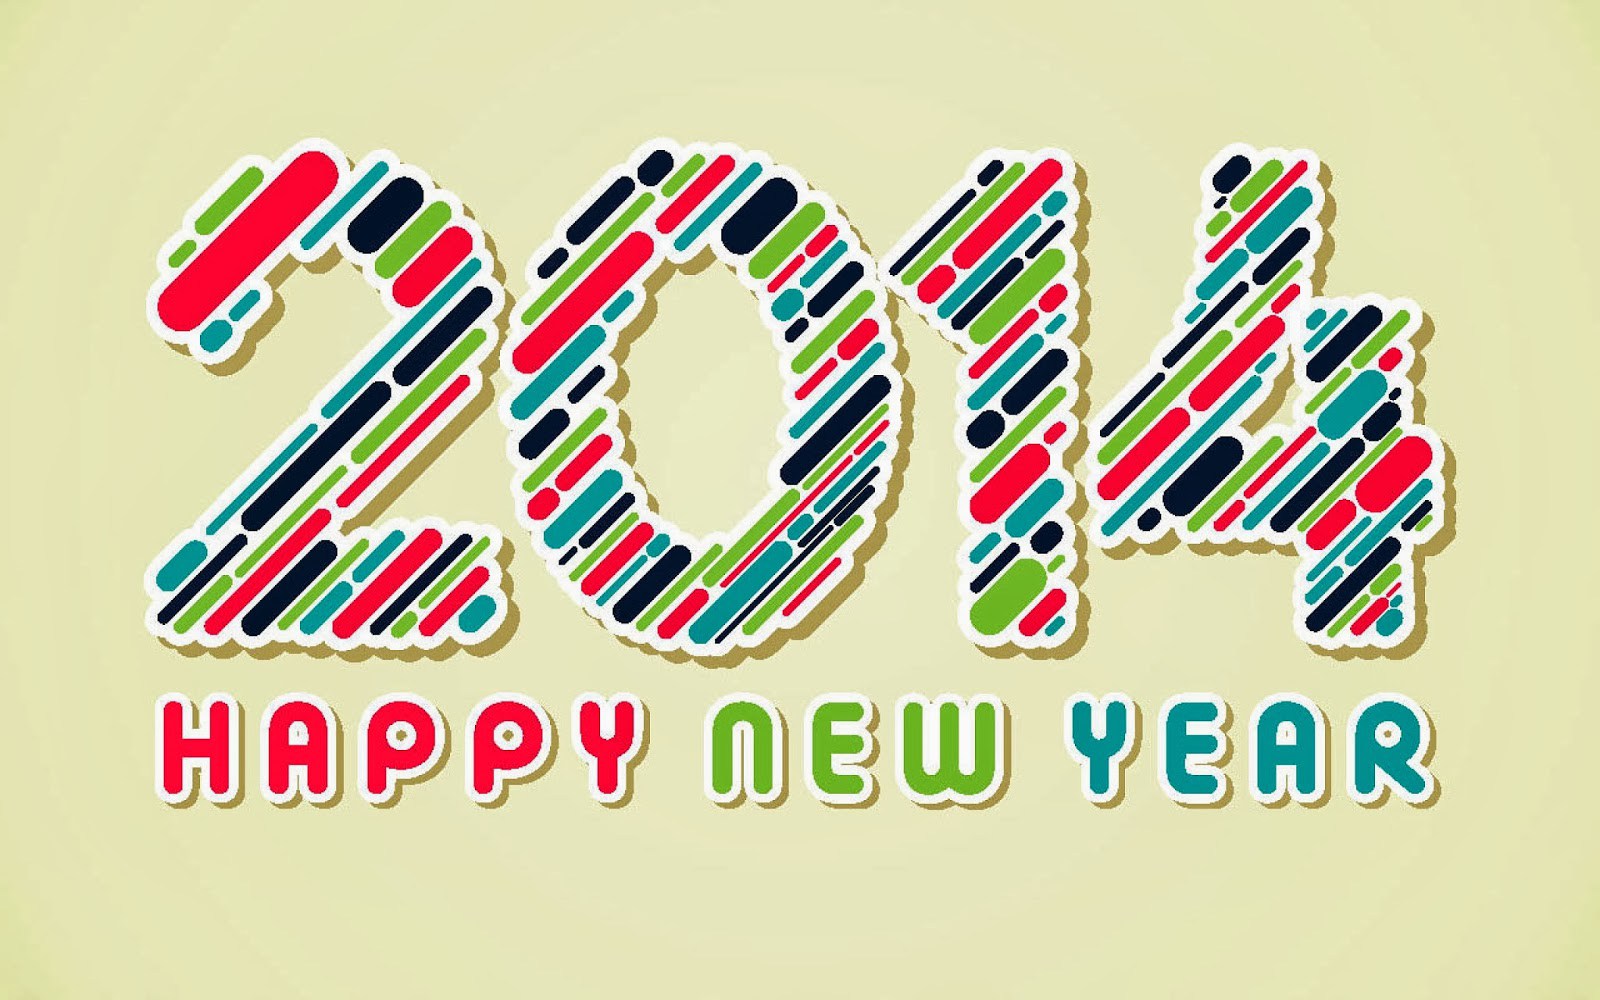 Christian 2014 New Year Clipart Images   Pictures   Becuo